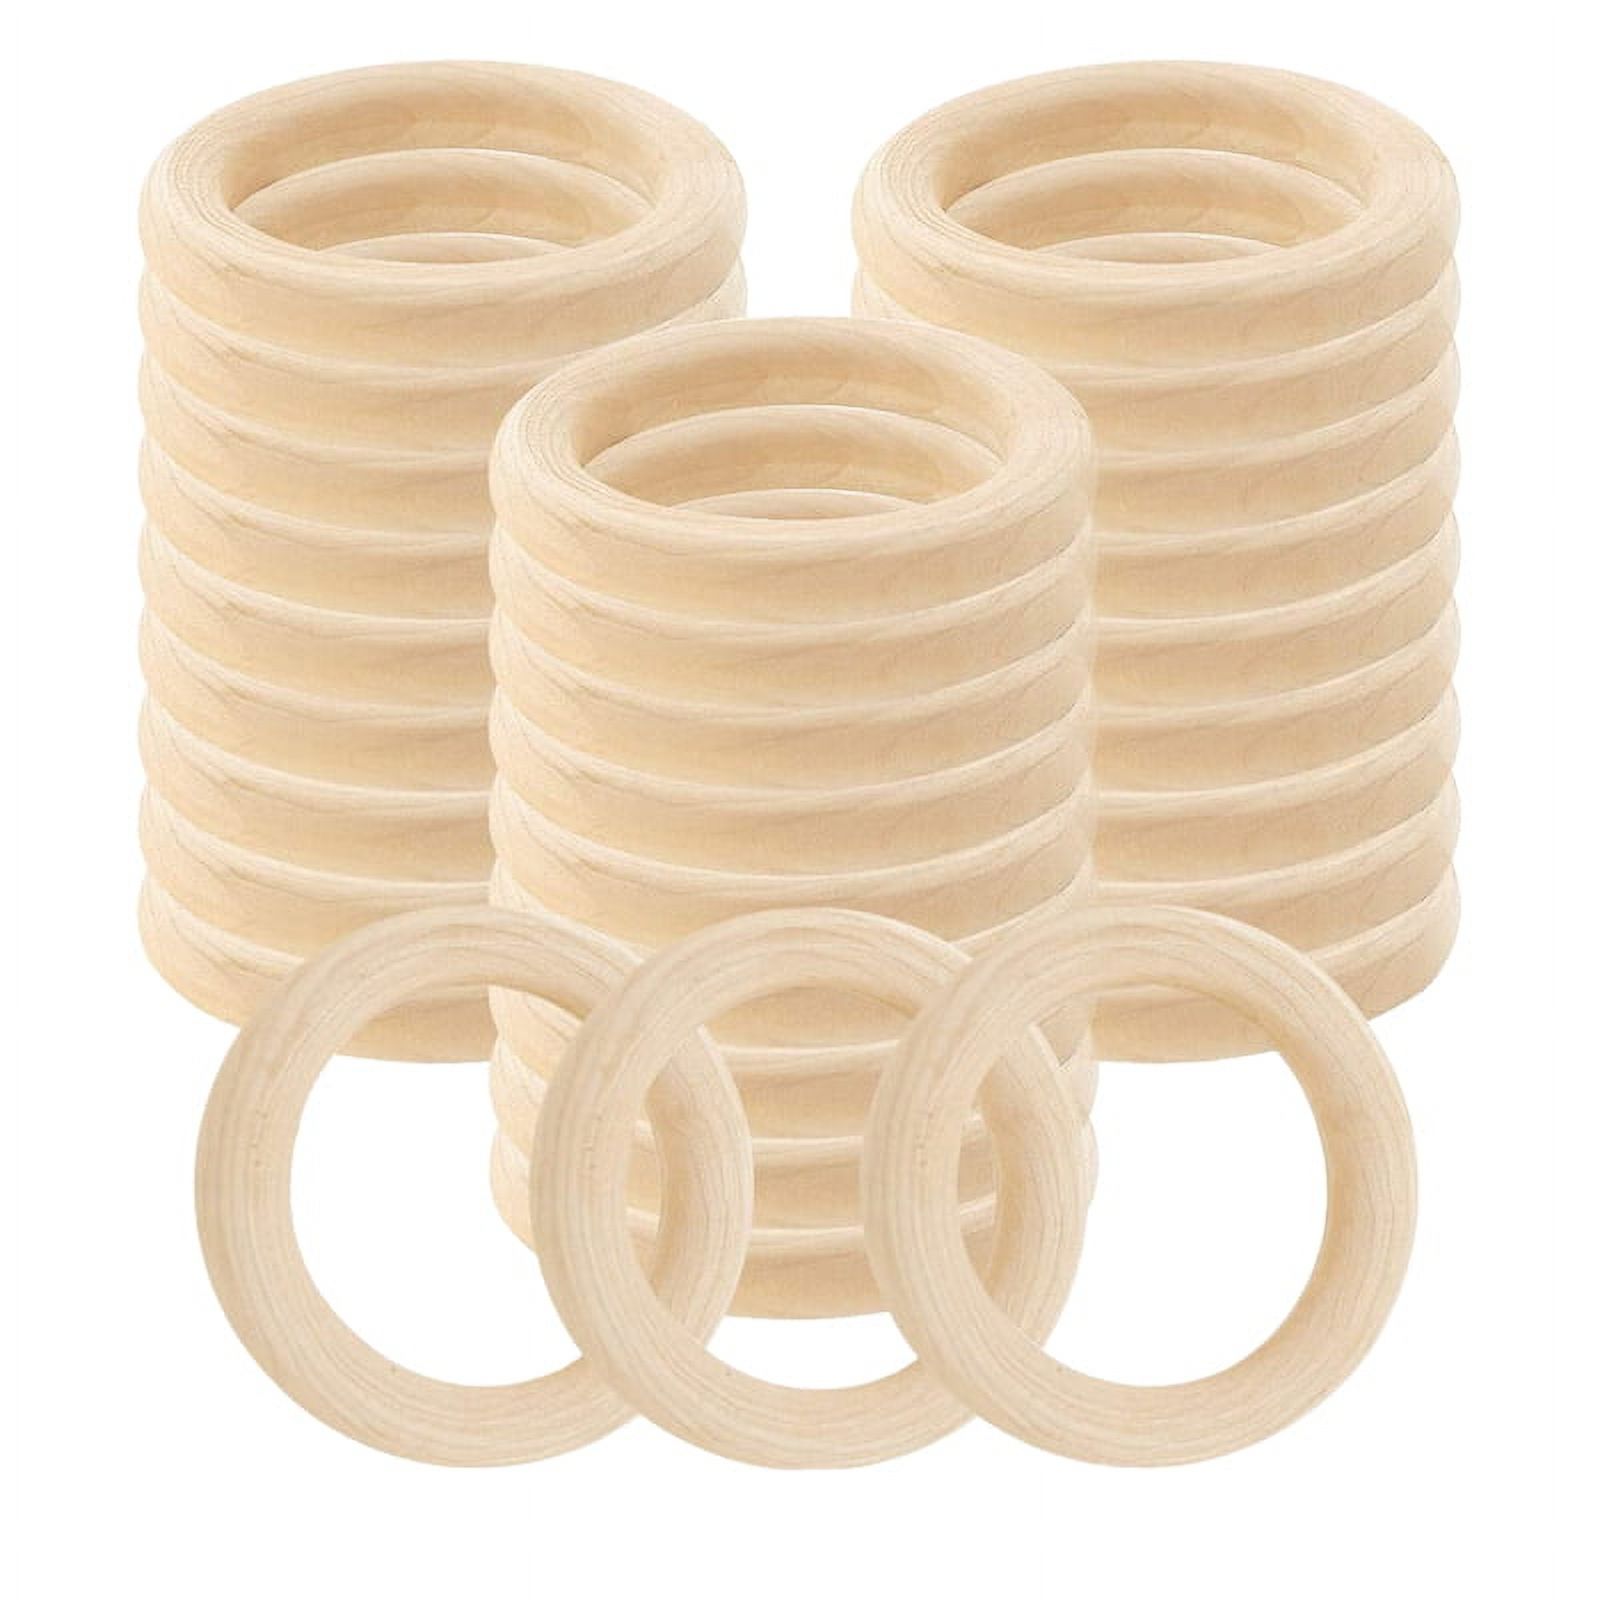 30 Pcs Natural Wood Rings 60mm Unfinished Macrame Wooden Ring Wood